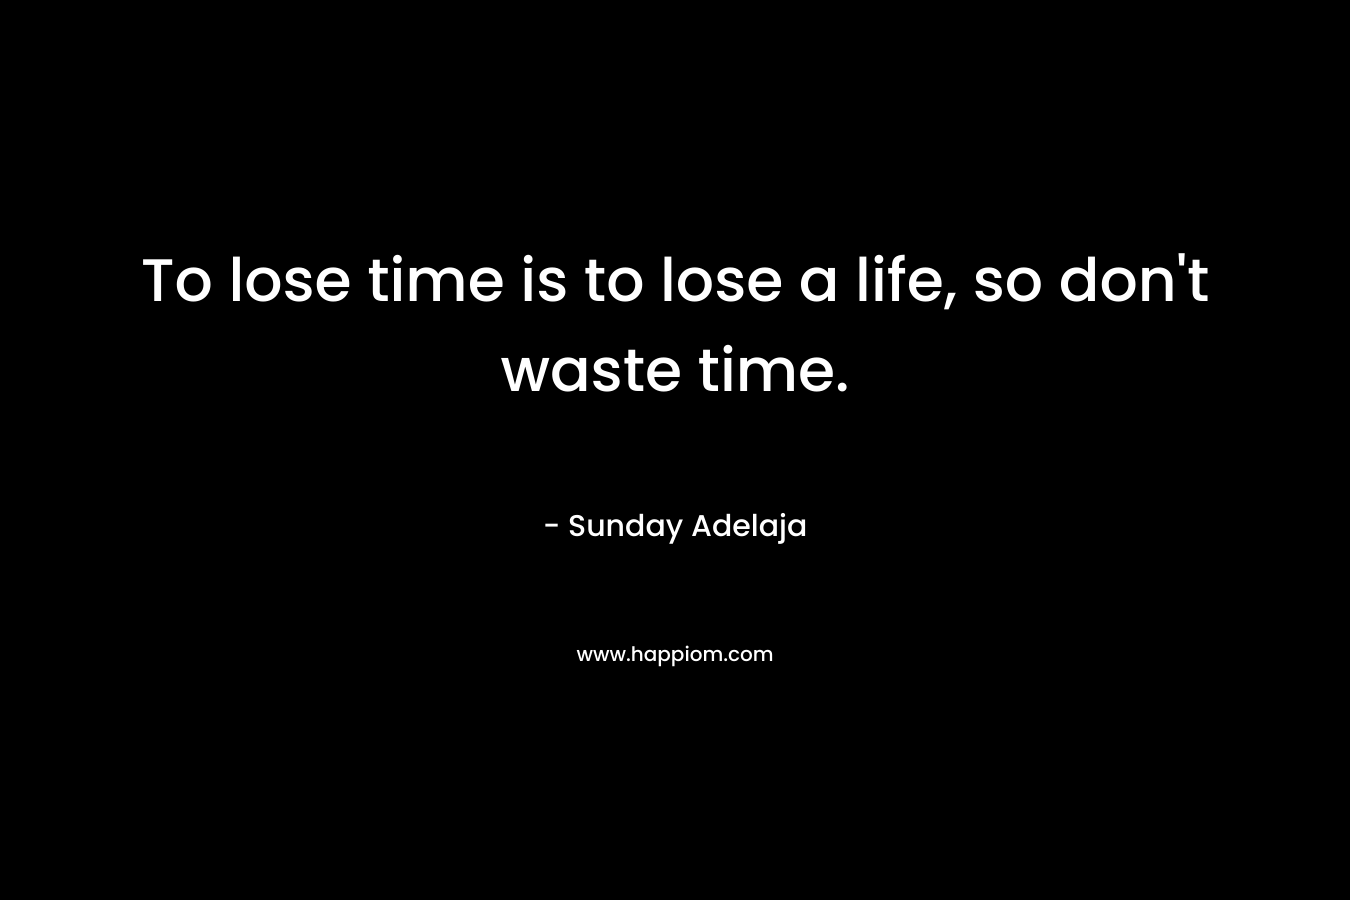 To lose time is to lose a life, so don't waste time.